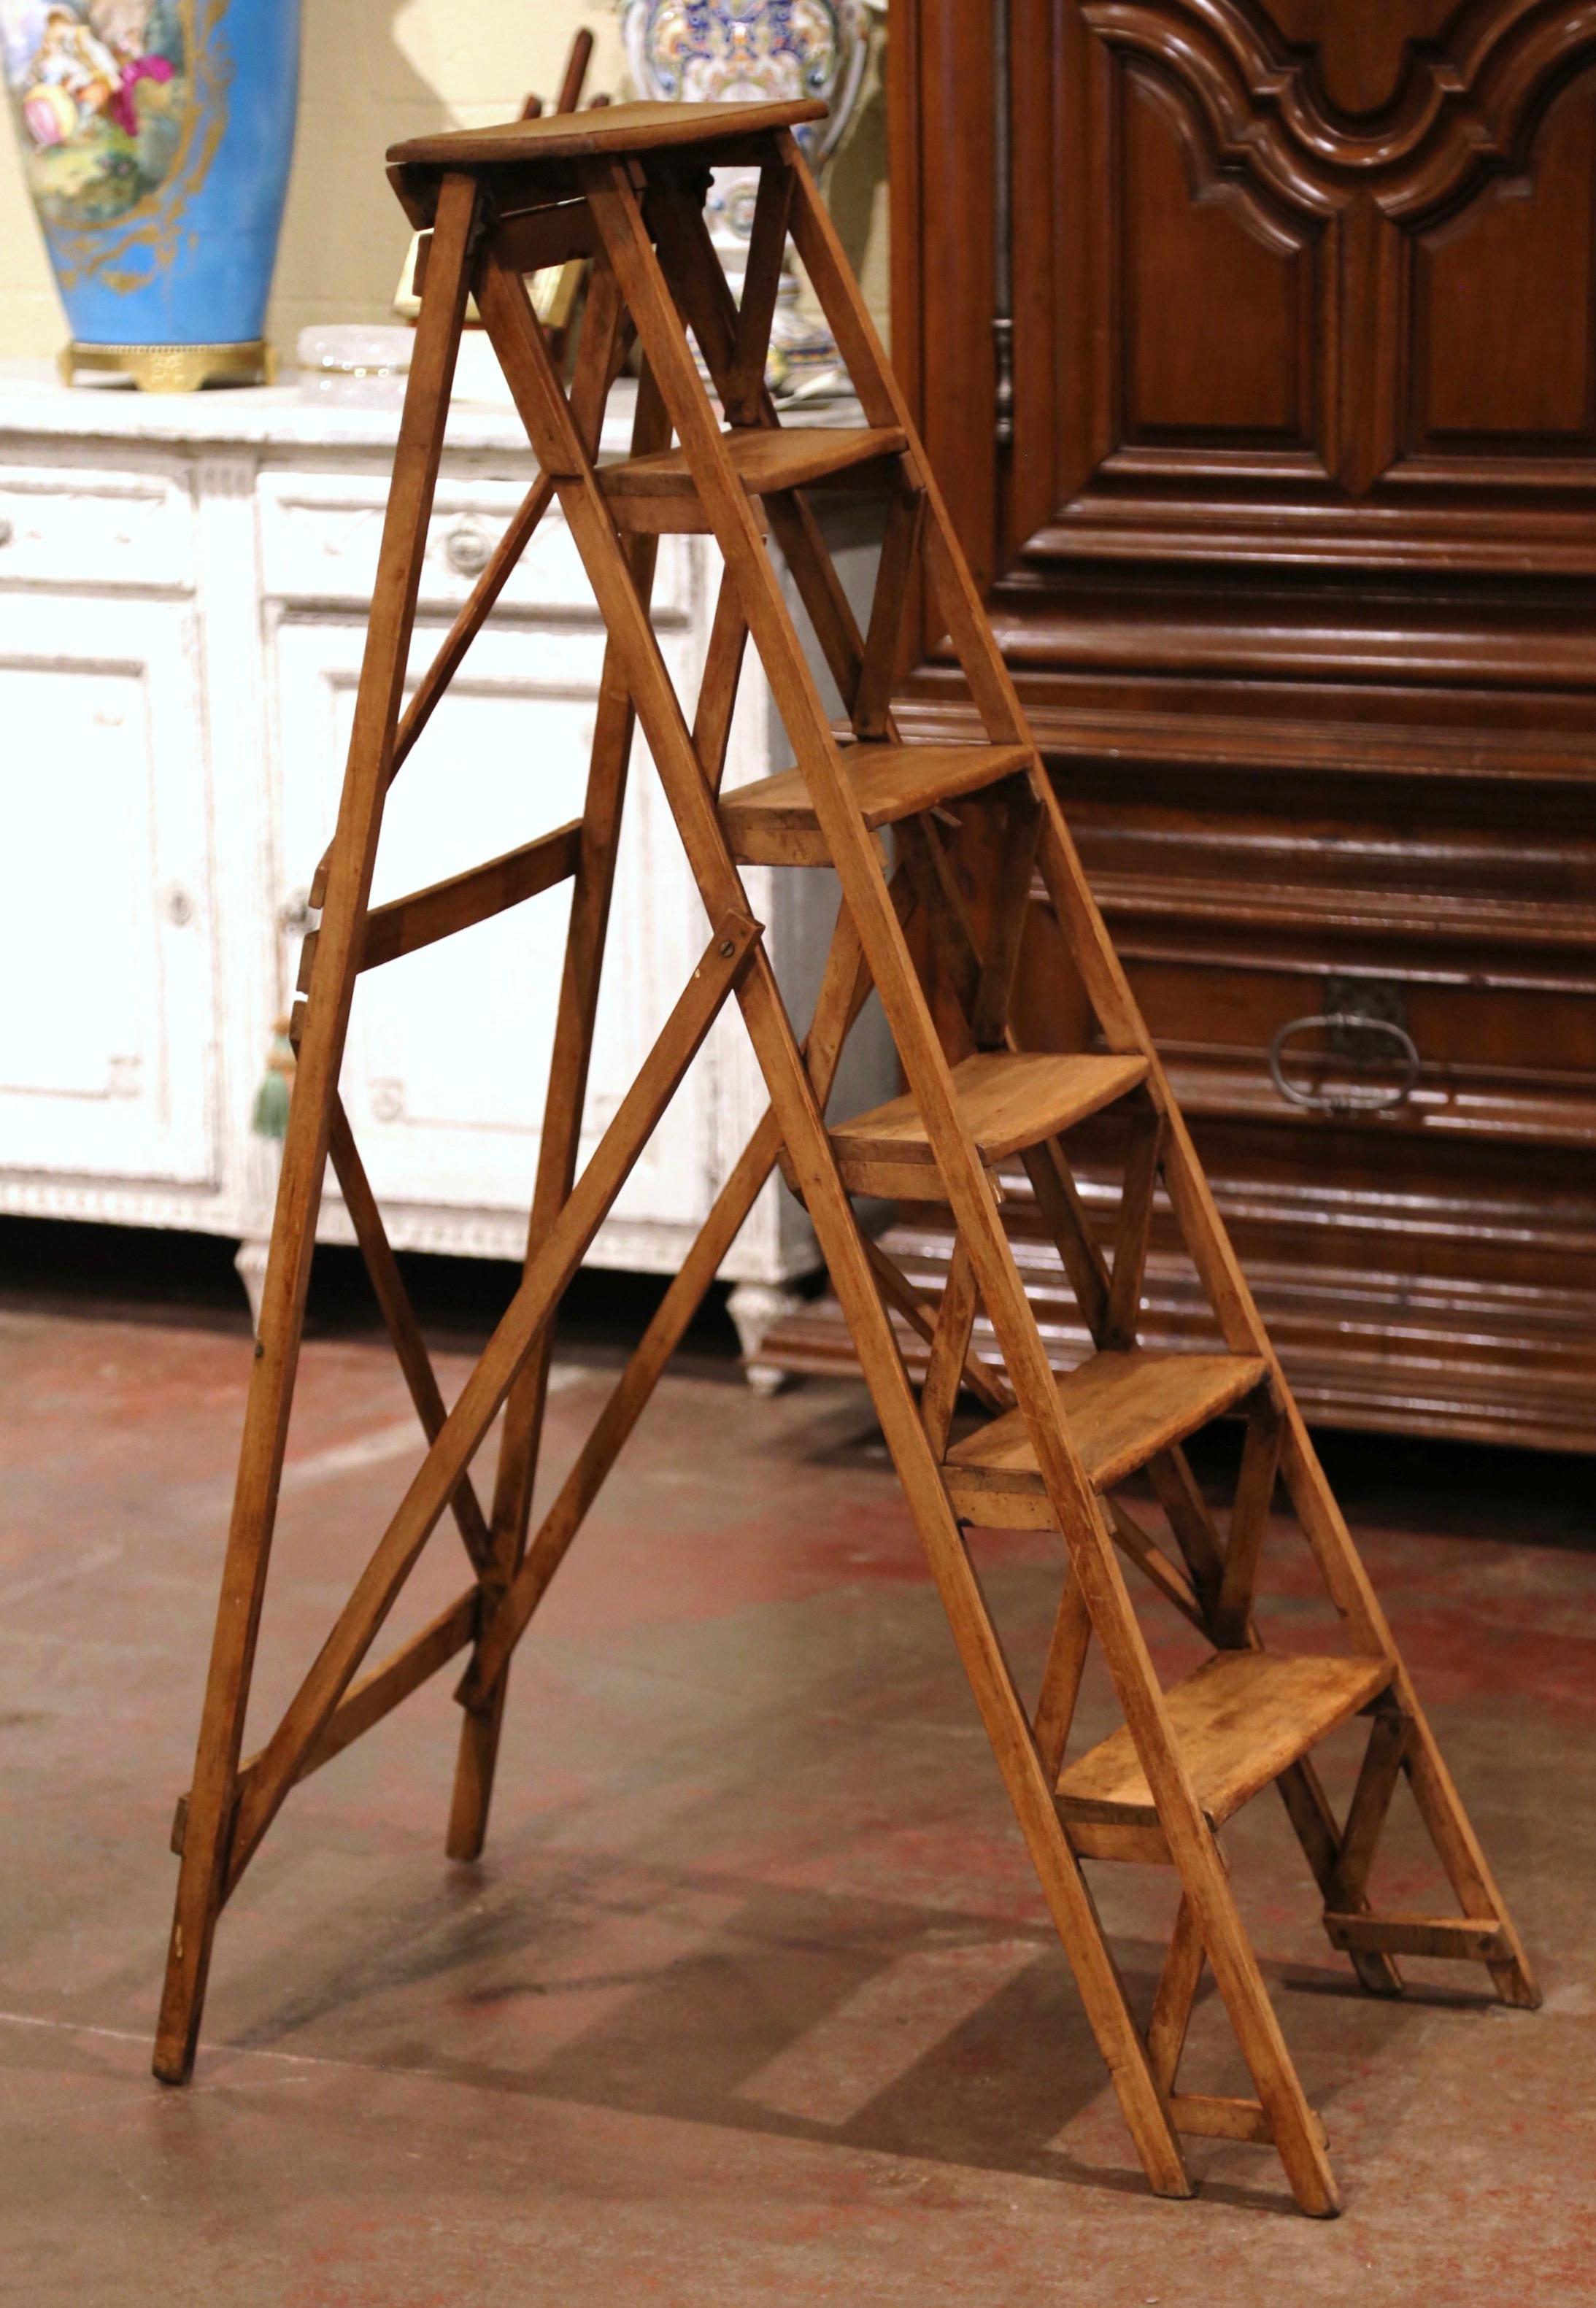 Crafted in France circa 1880 and made of walnut, the stairs features six graduated steps to one side and connected to the opposing support with a wooden and metal action folding mechanism. Practical and useful, the ladder can folded and put away if